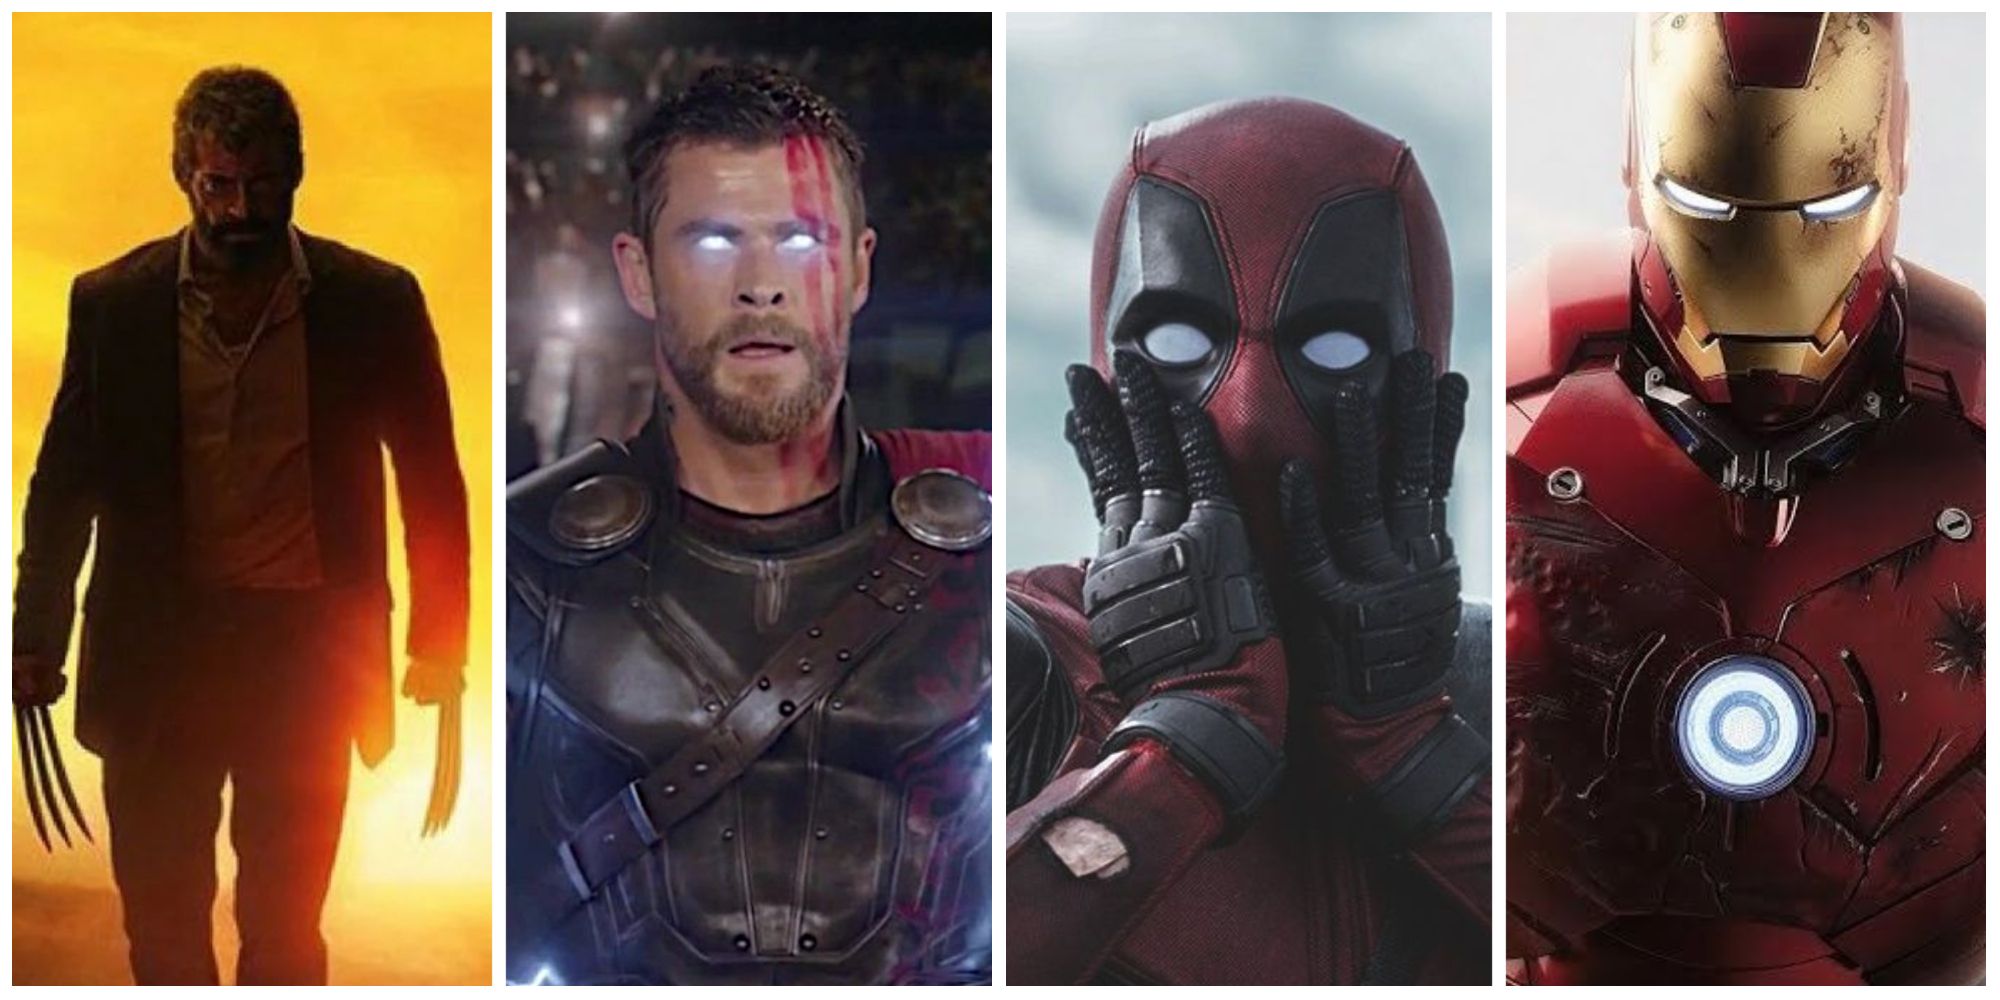 A four way split image showing Wolverine, Thor, Deadpool, and Iron Man